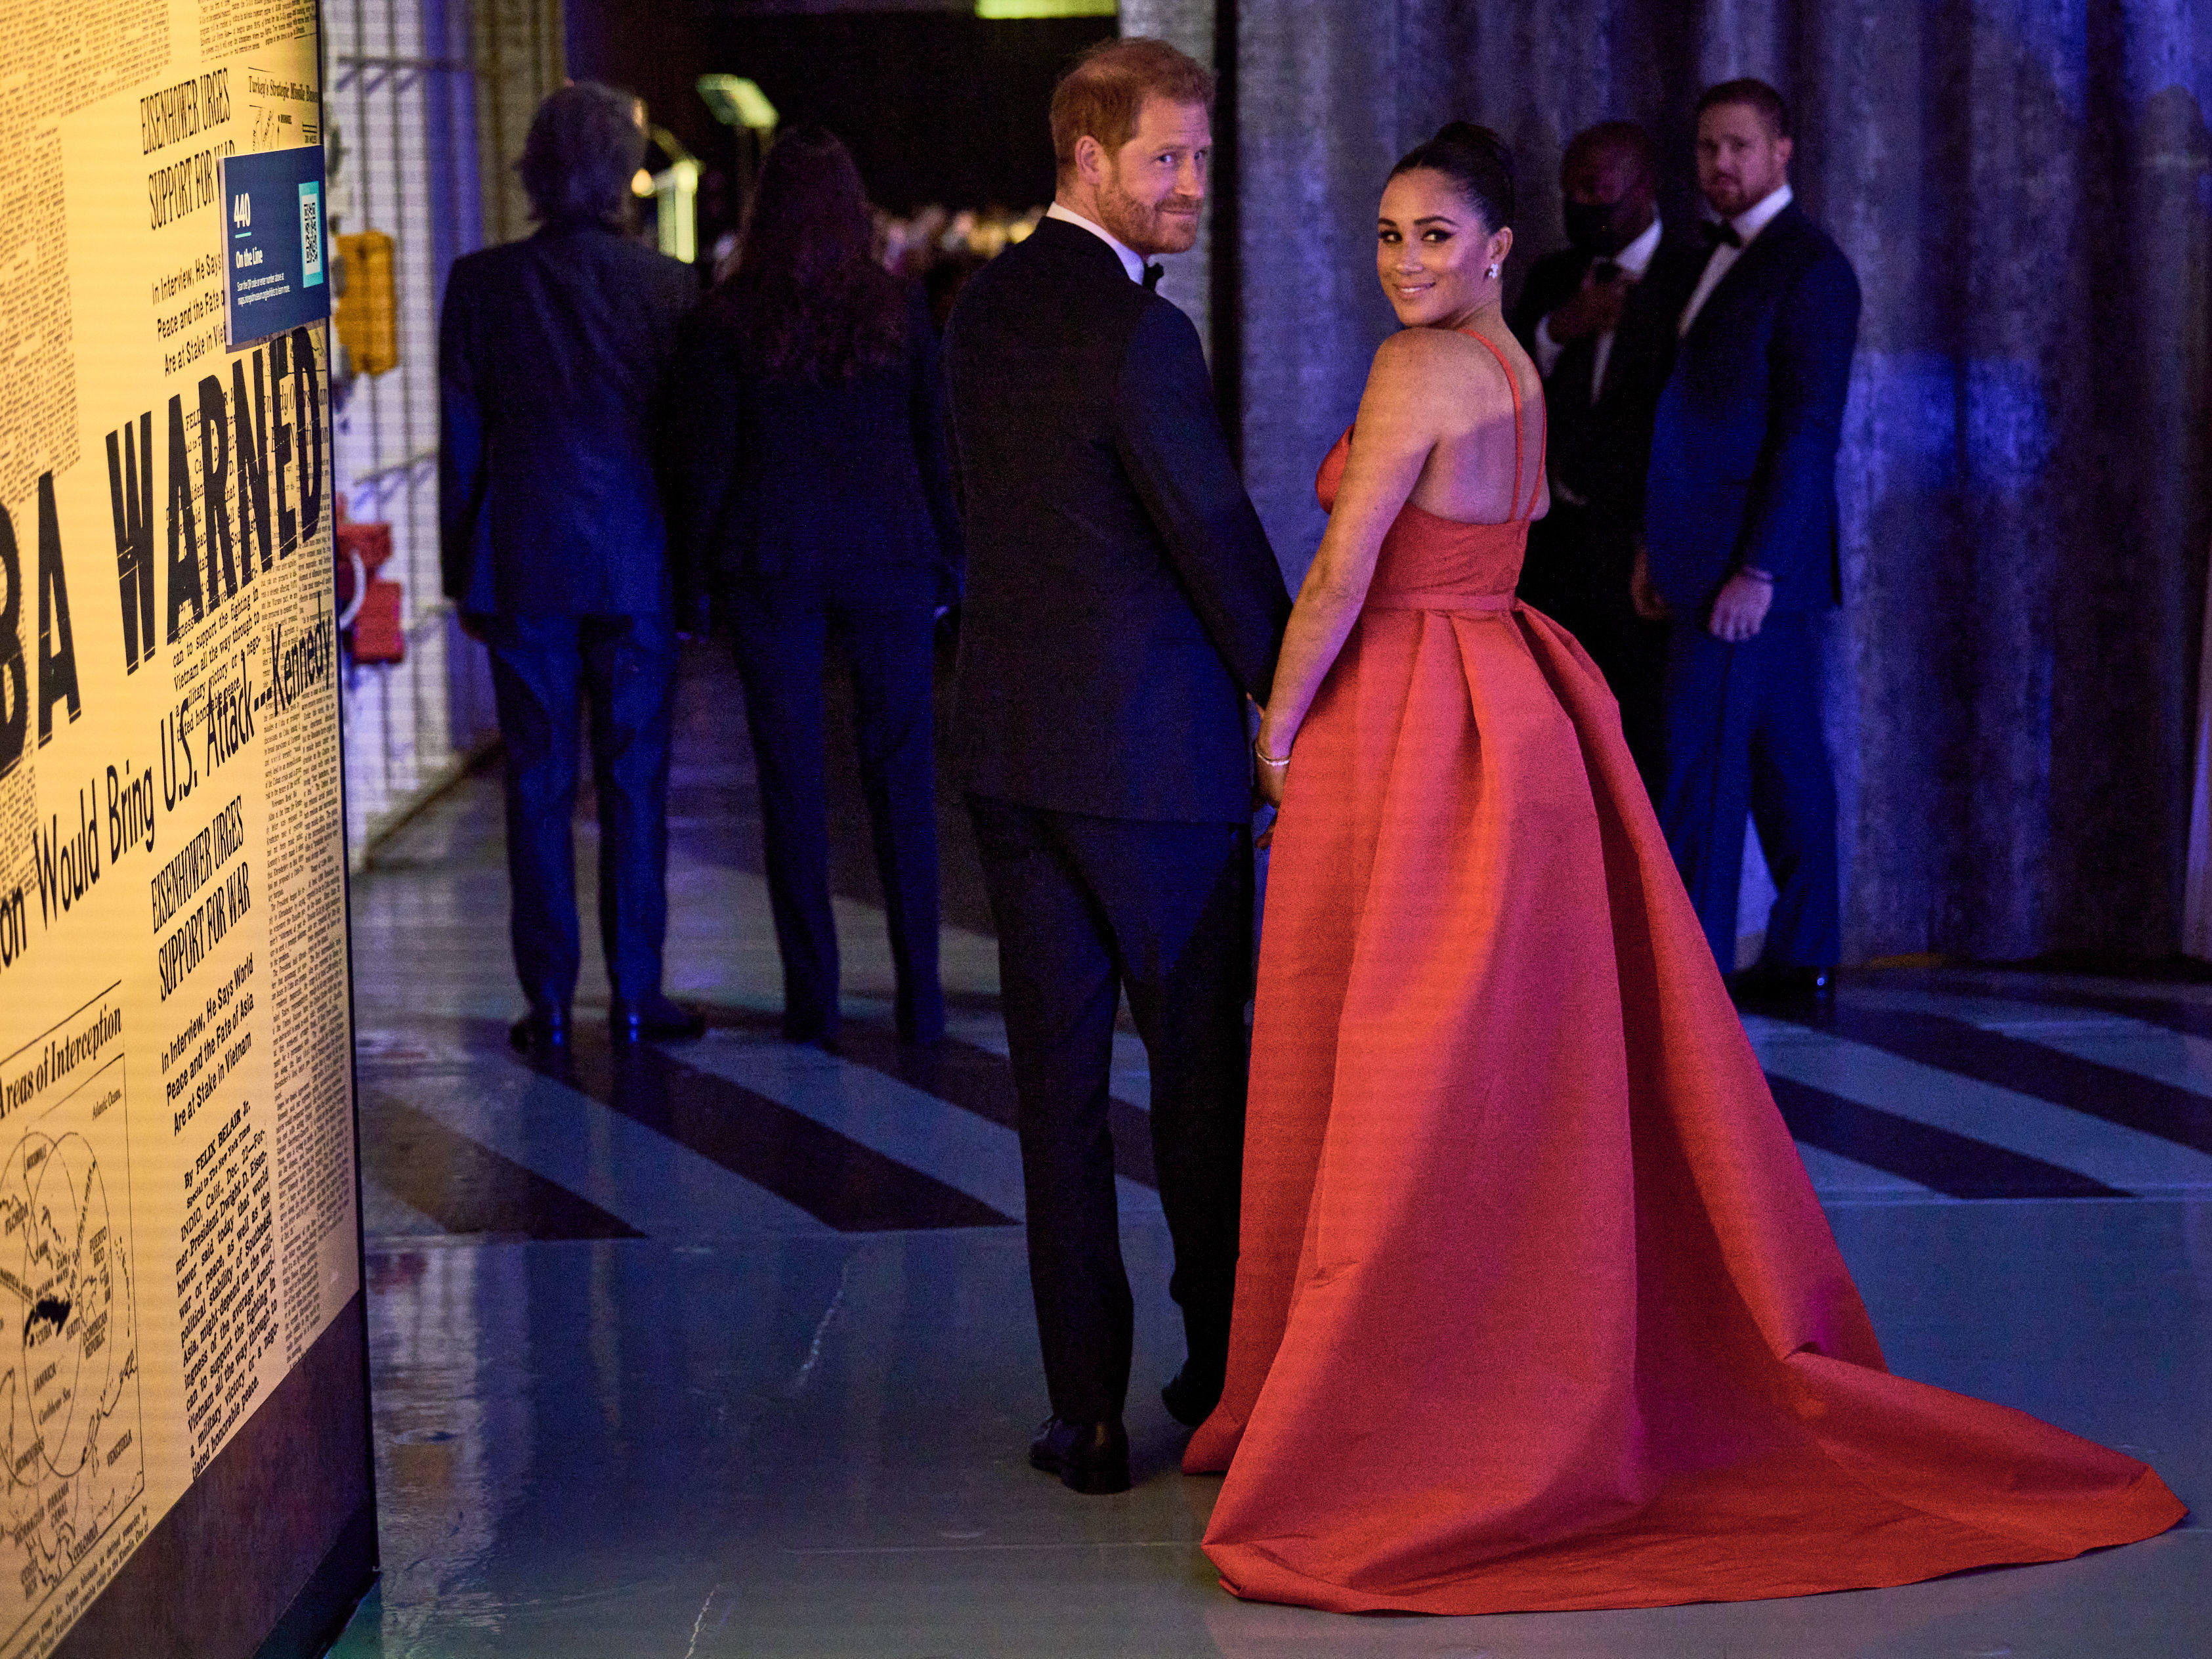 Prince Harry and Meghan Markle look to be taking 2022 by storm. Here’s how. Photo: PA